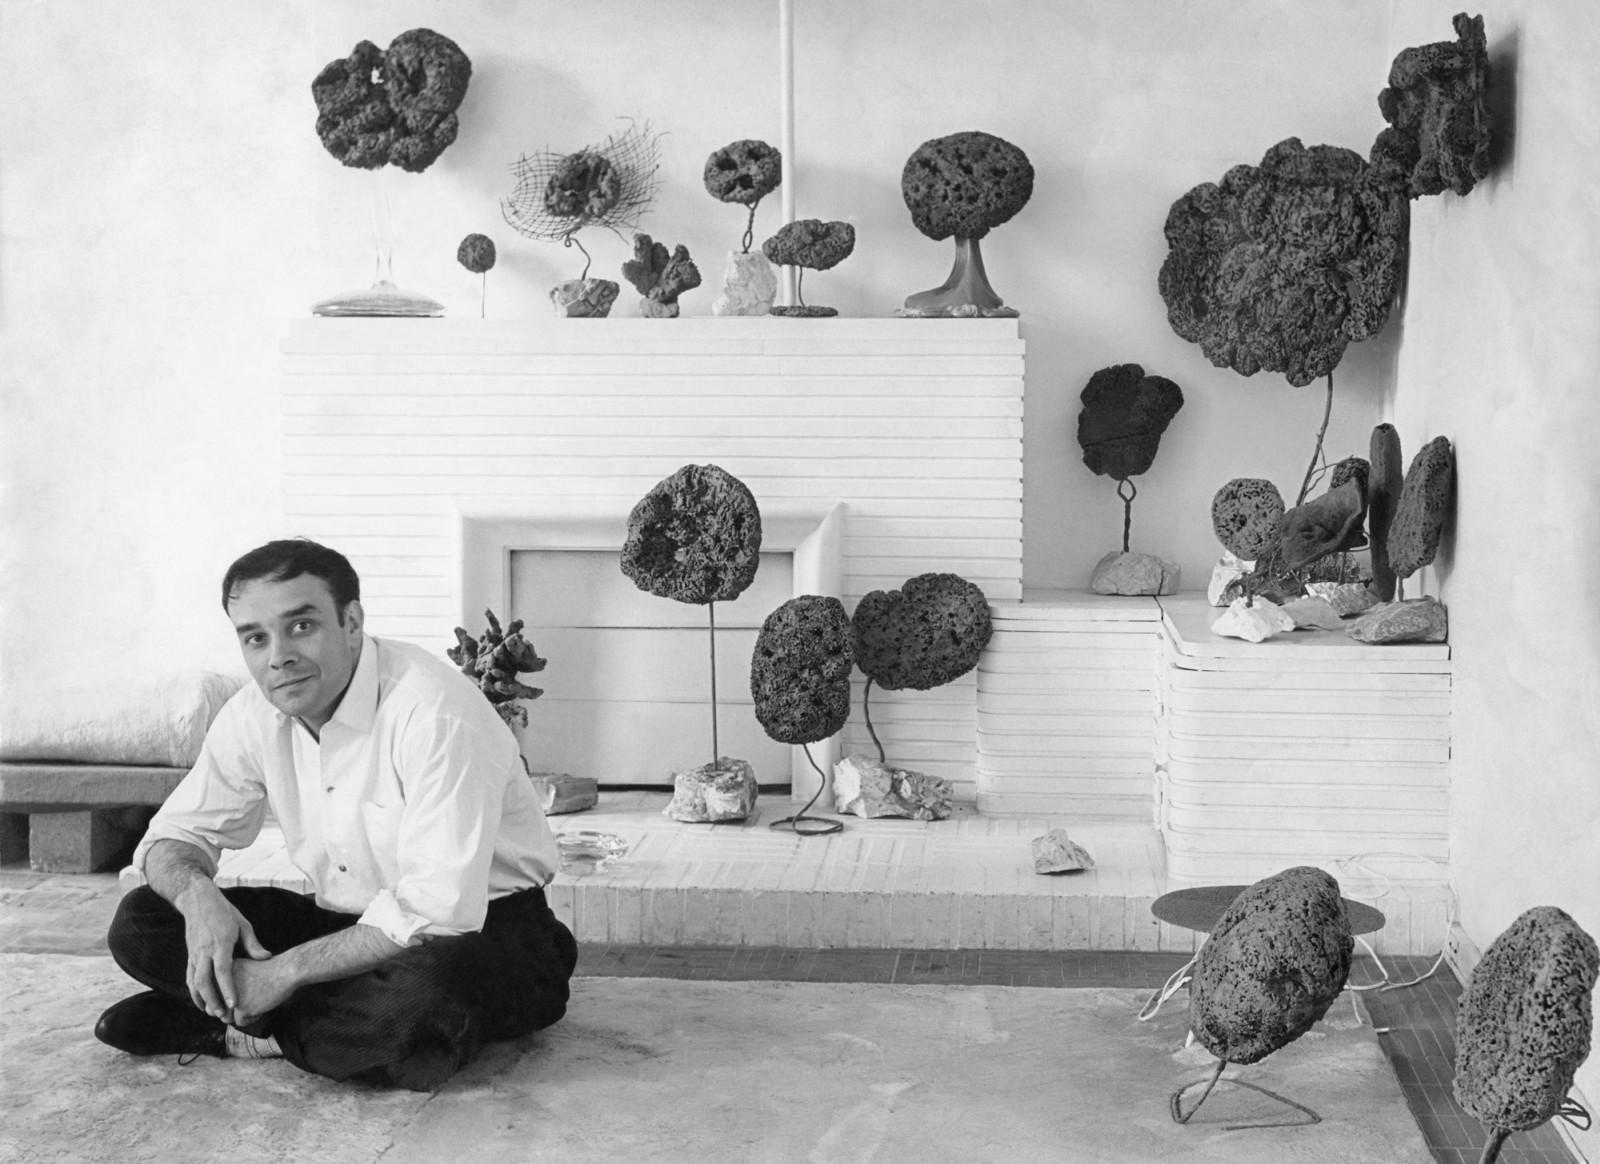 Yves Klein in his studio surrounded by his Sponge Sculptures